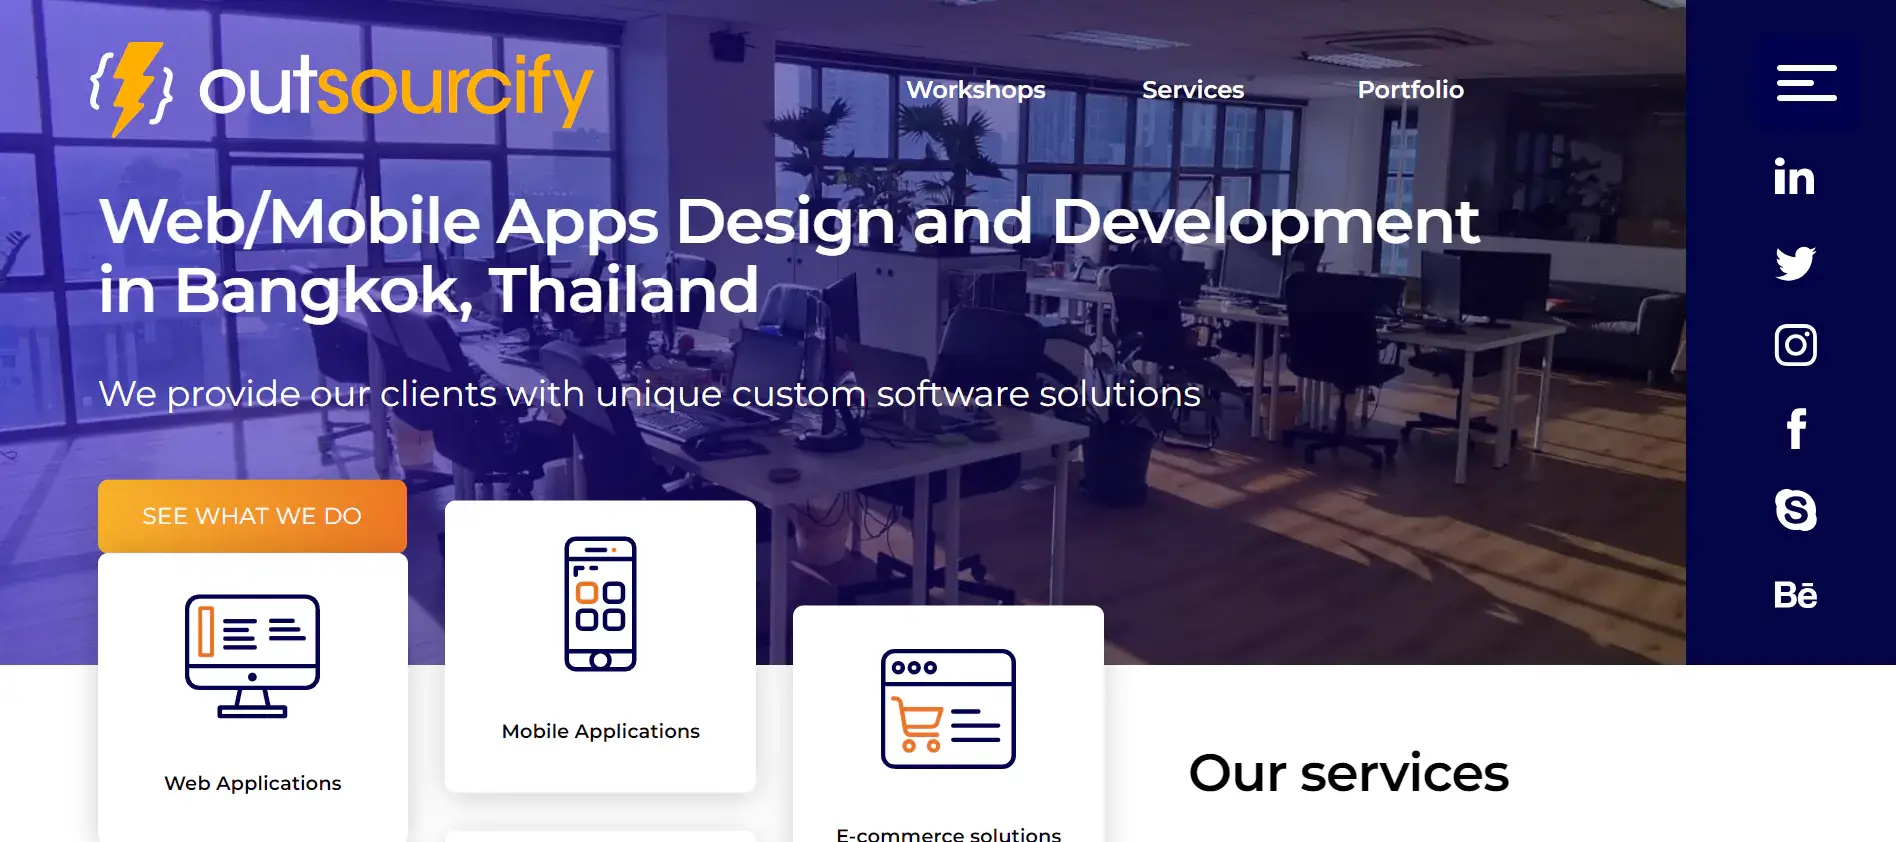 Software Development Company in Thailand - Outsourcify